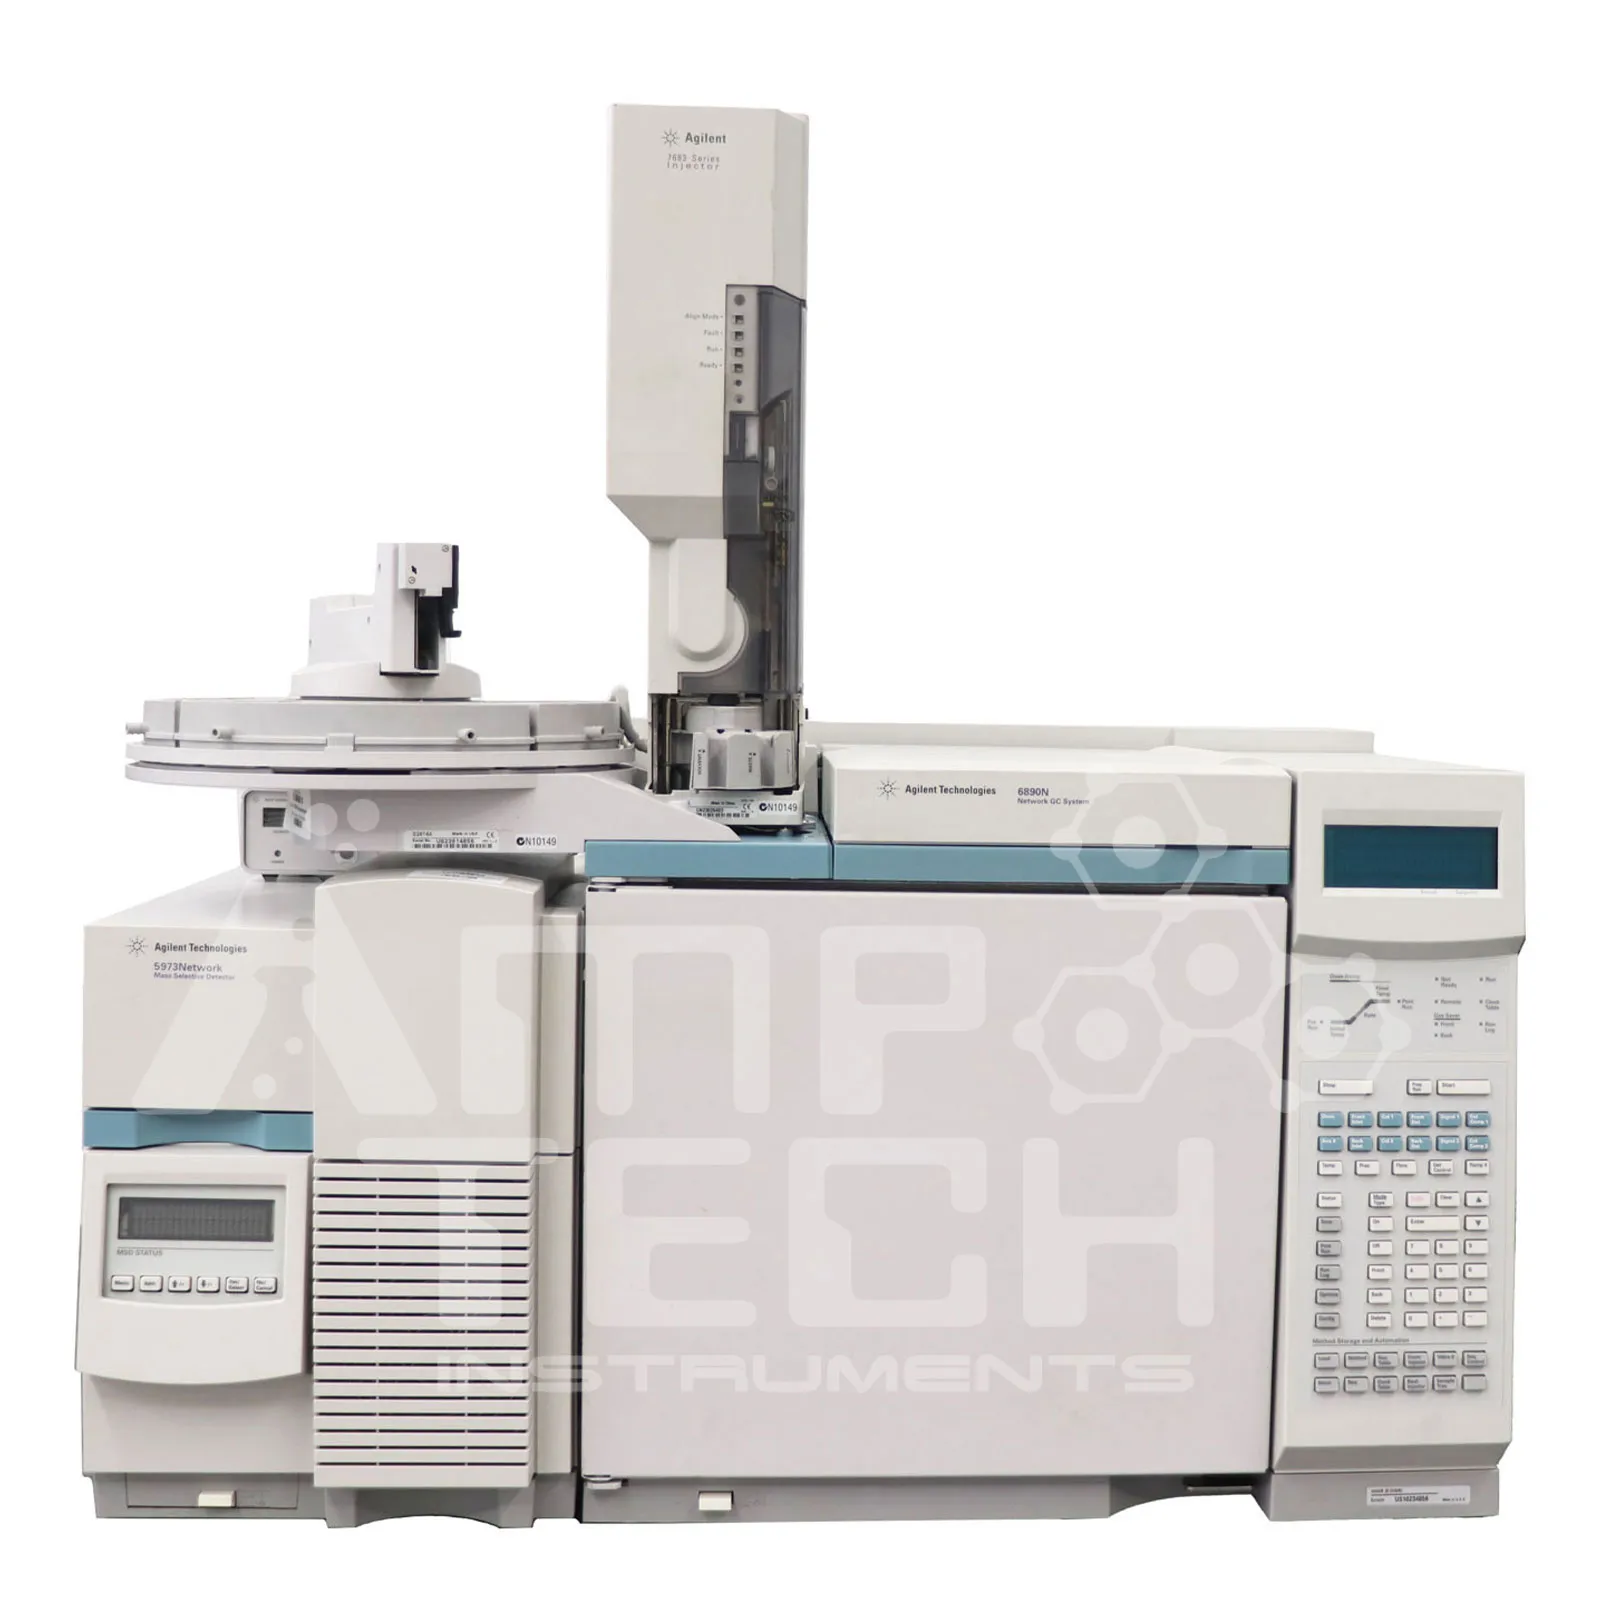 Agilent 6890N 5973N Network GC/MS System w/ 7683 Autosampler, Software